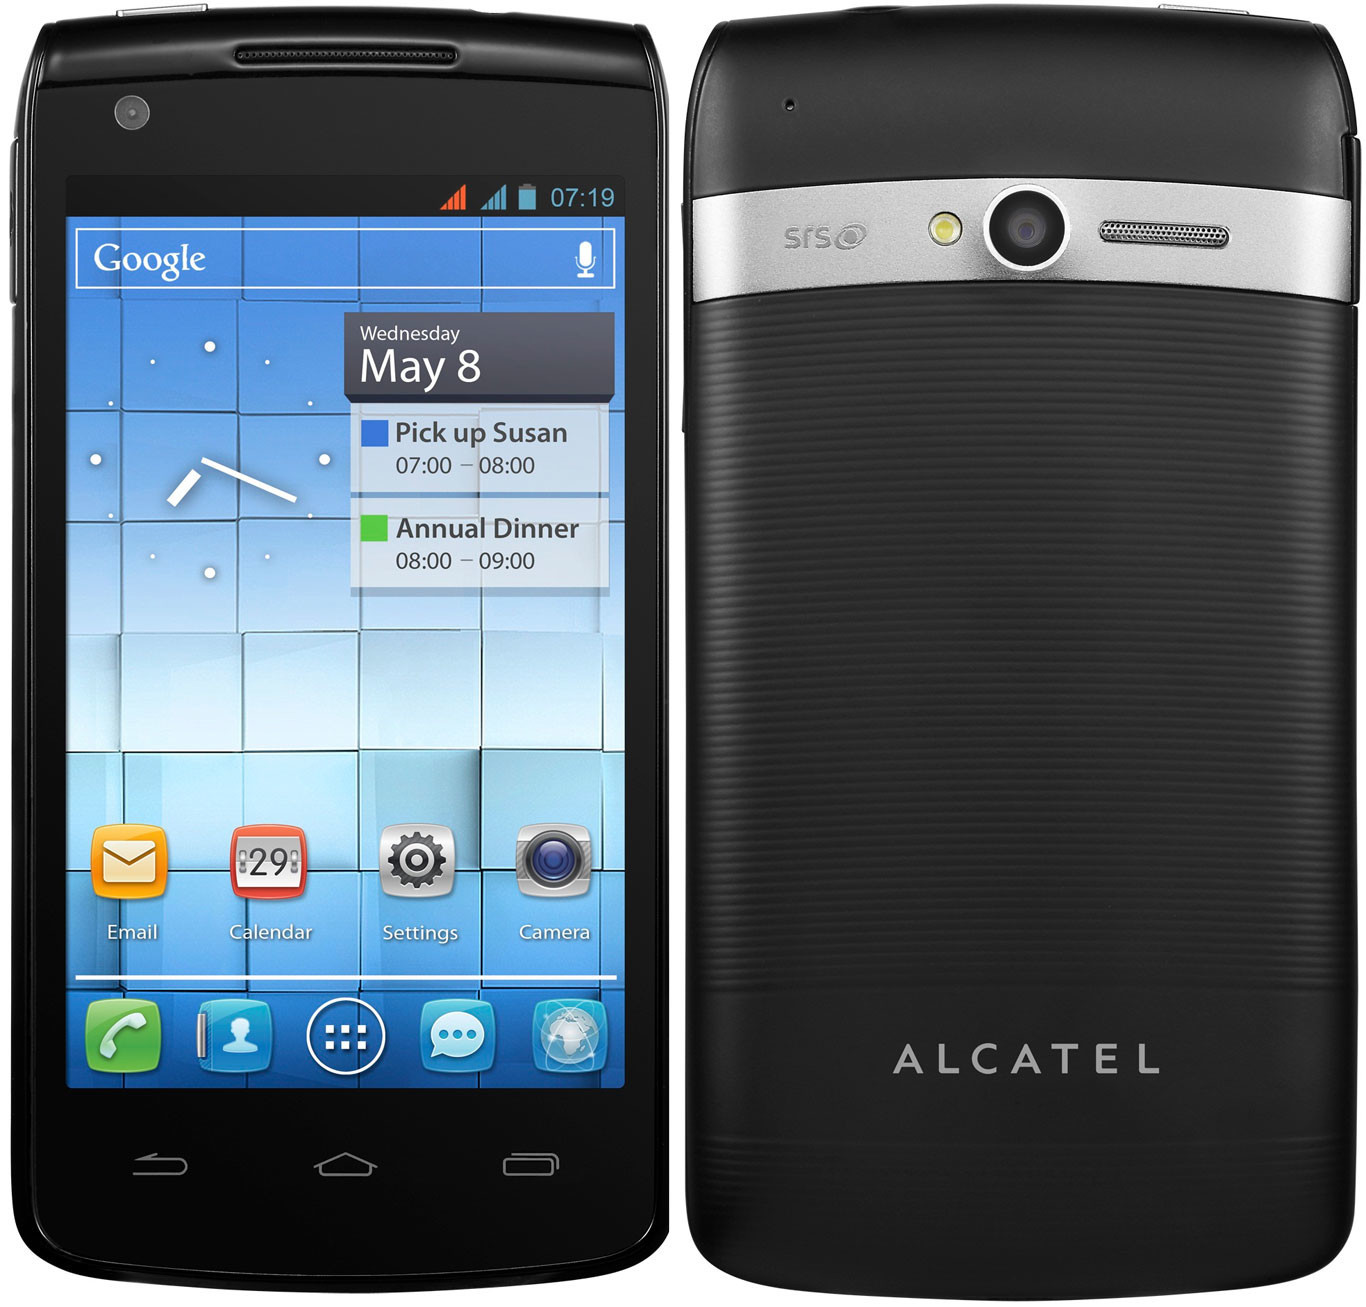 Alcatel One Touch OT-992D - Specs and Price - Phonegg1366 x 1307